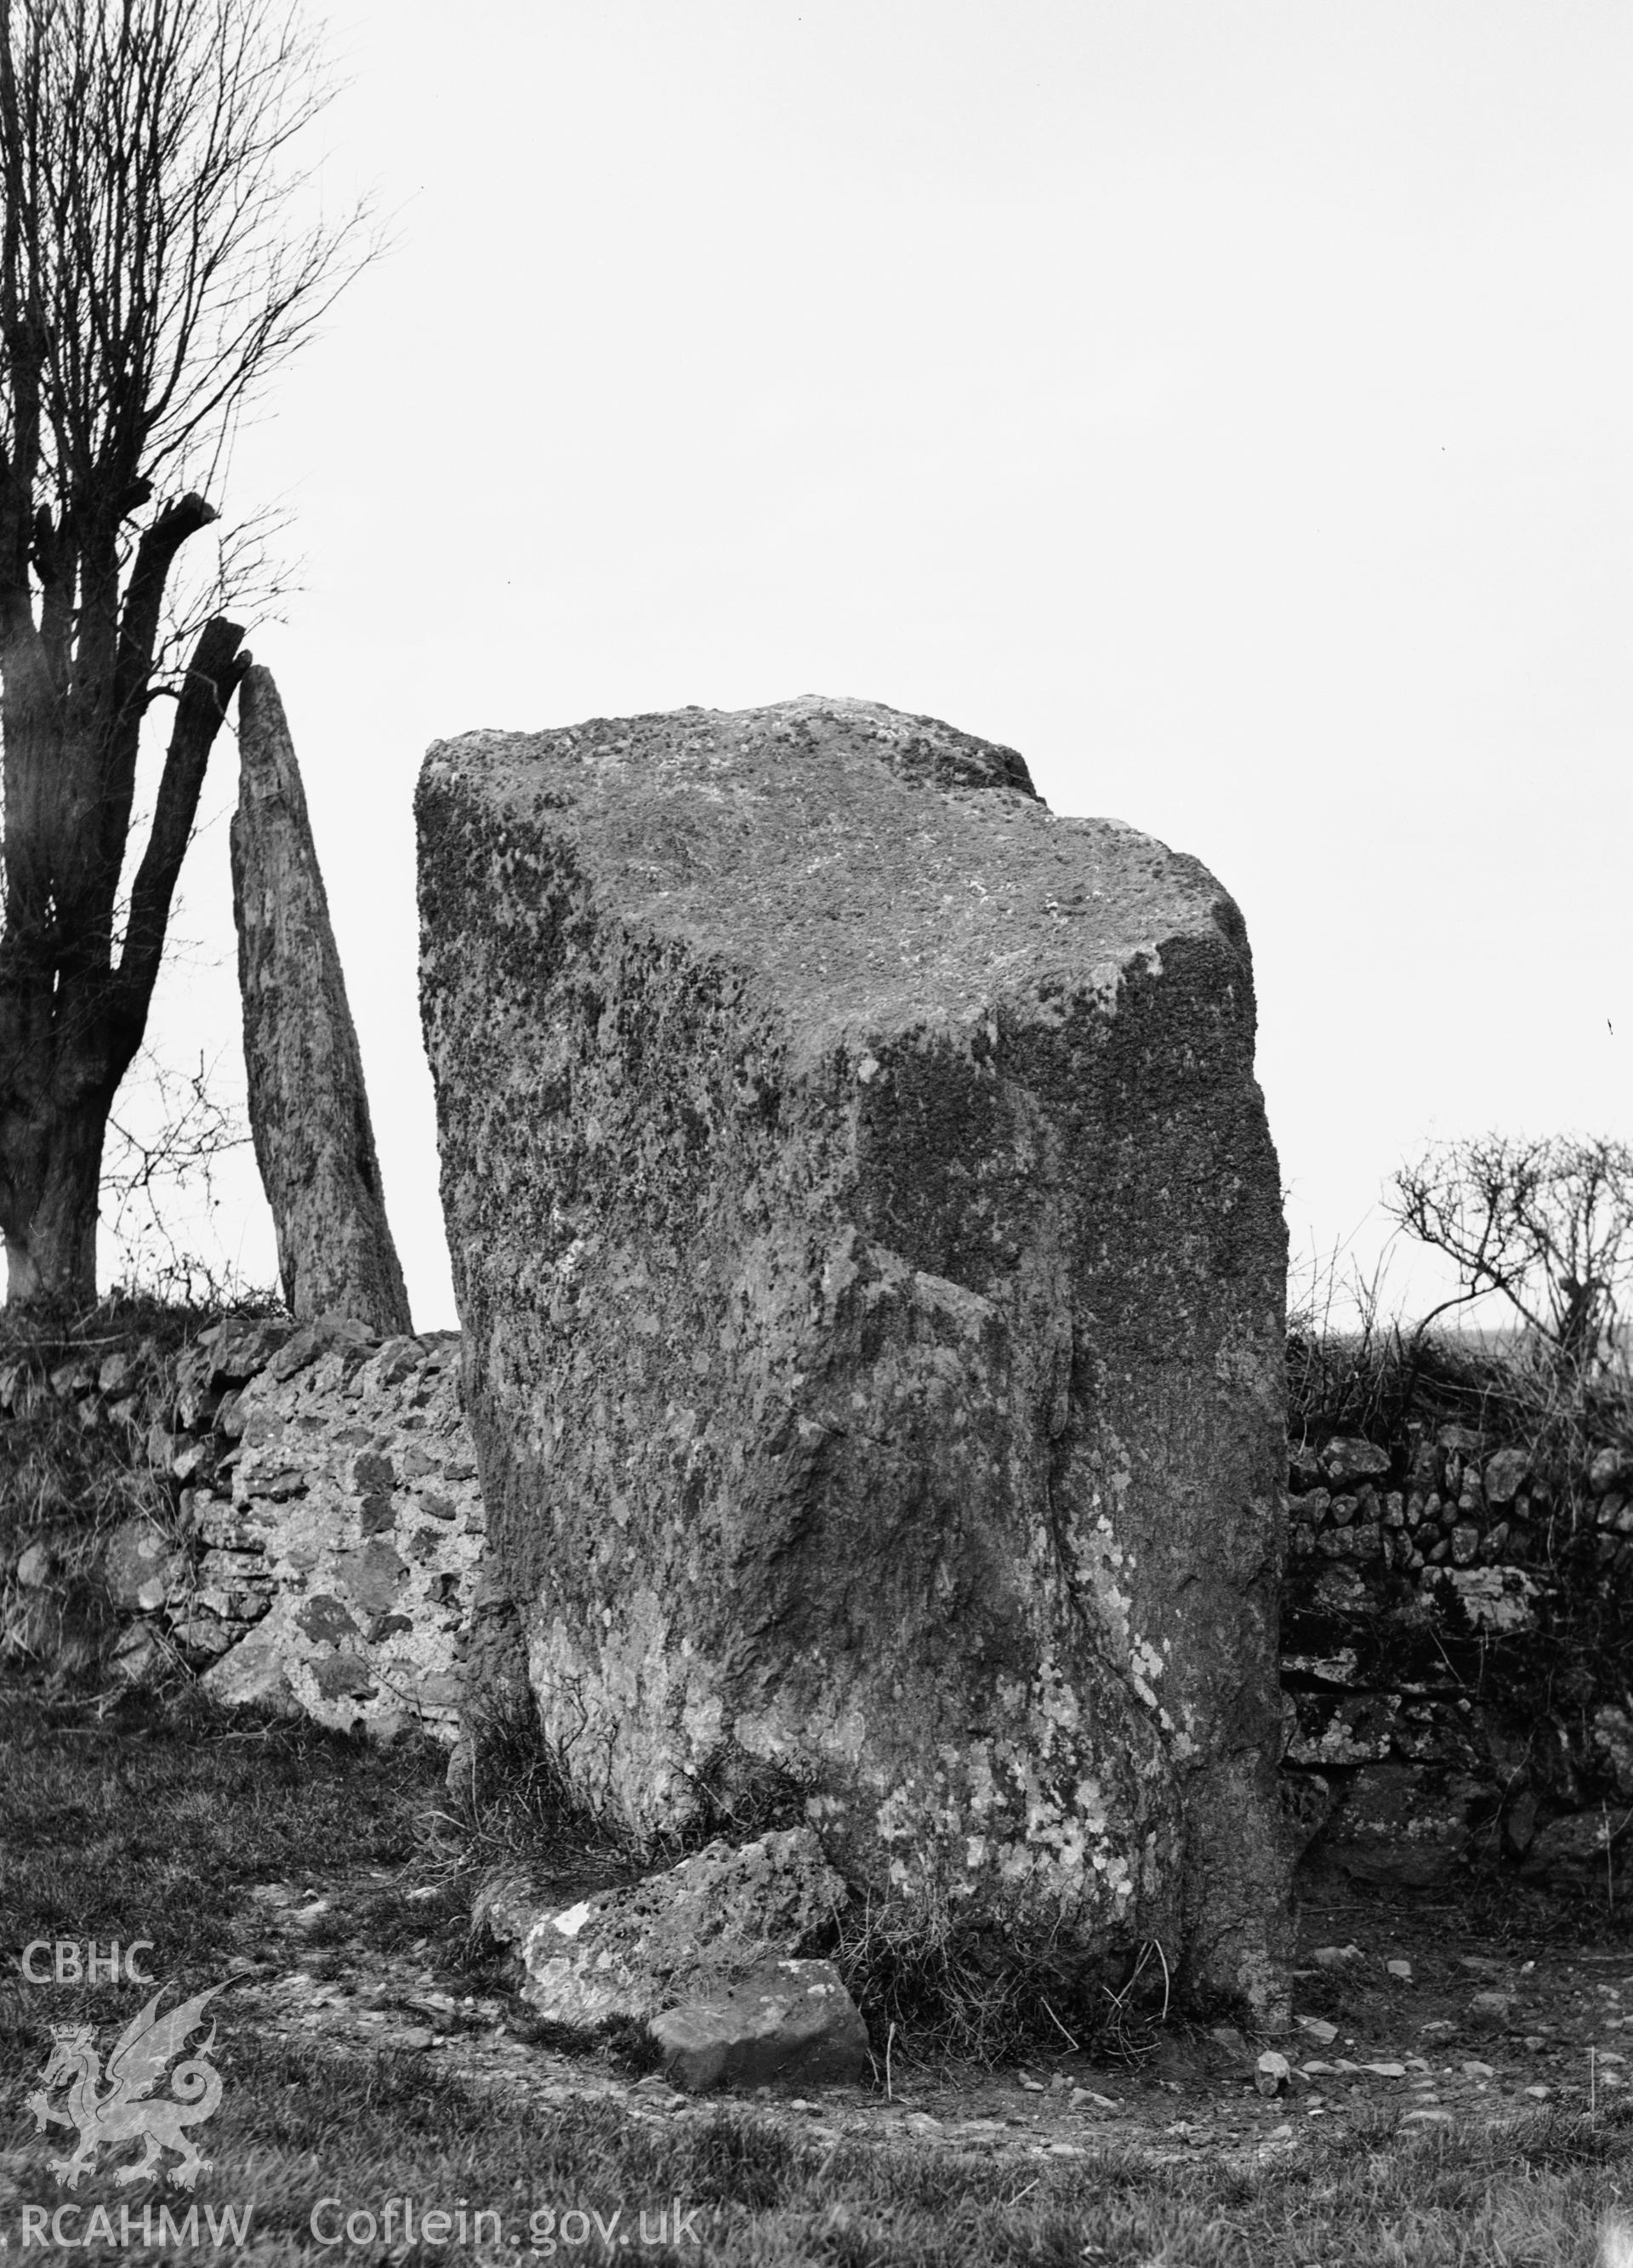 One black and white photograph showing Bryngwyn stone, taken by RCAHMW , before 1960.